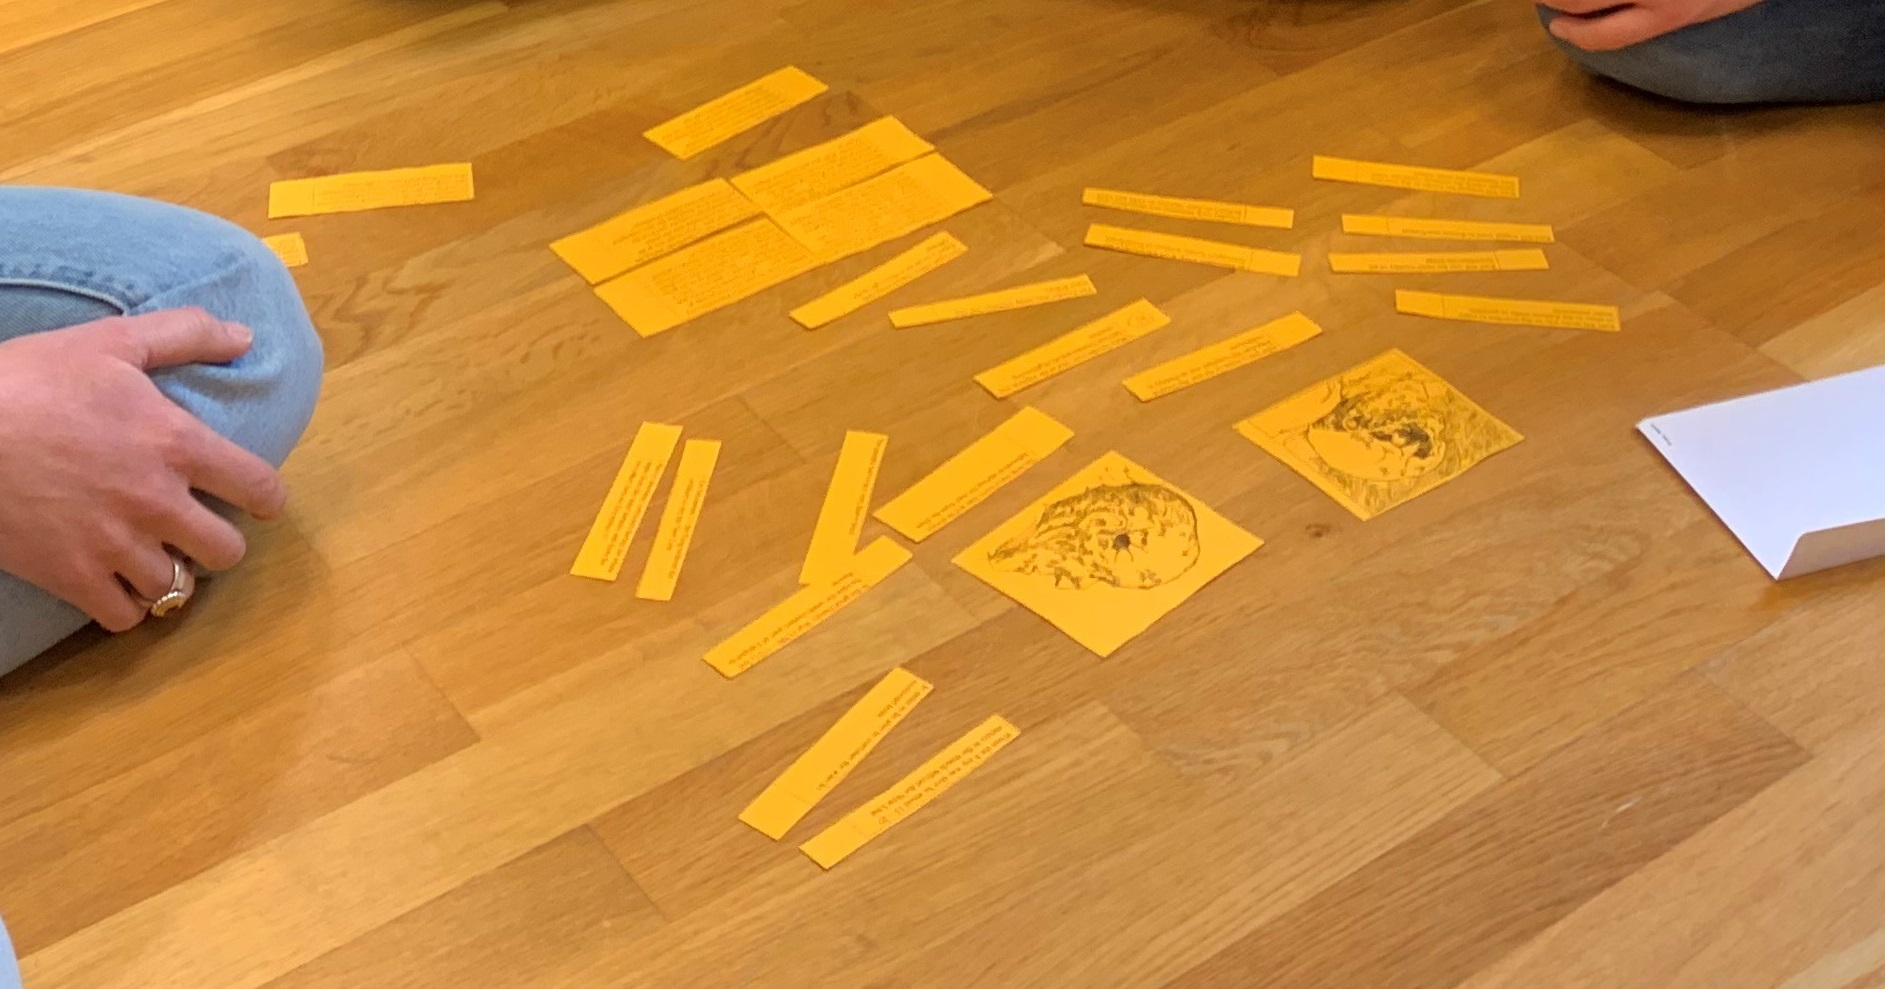 The picture shows pieces of paper lying on the floor. 